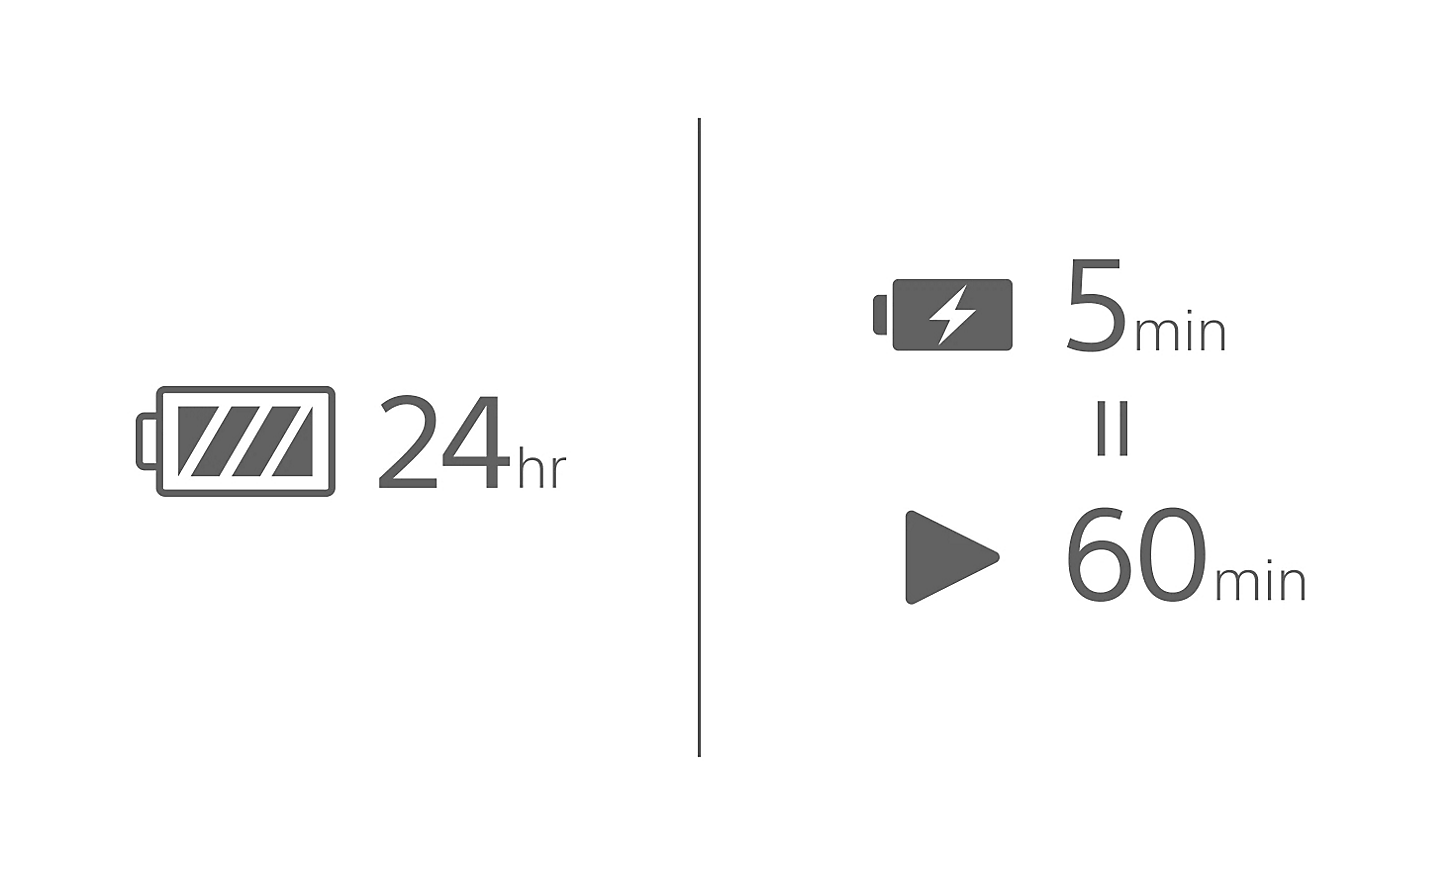 Illustration of charging times